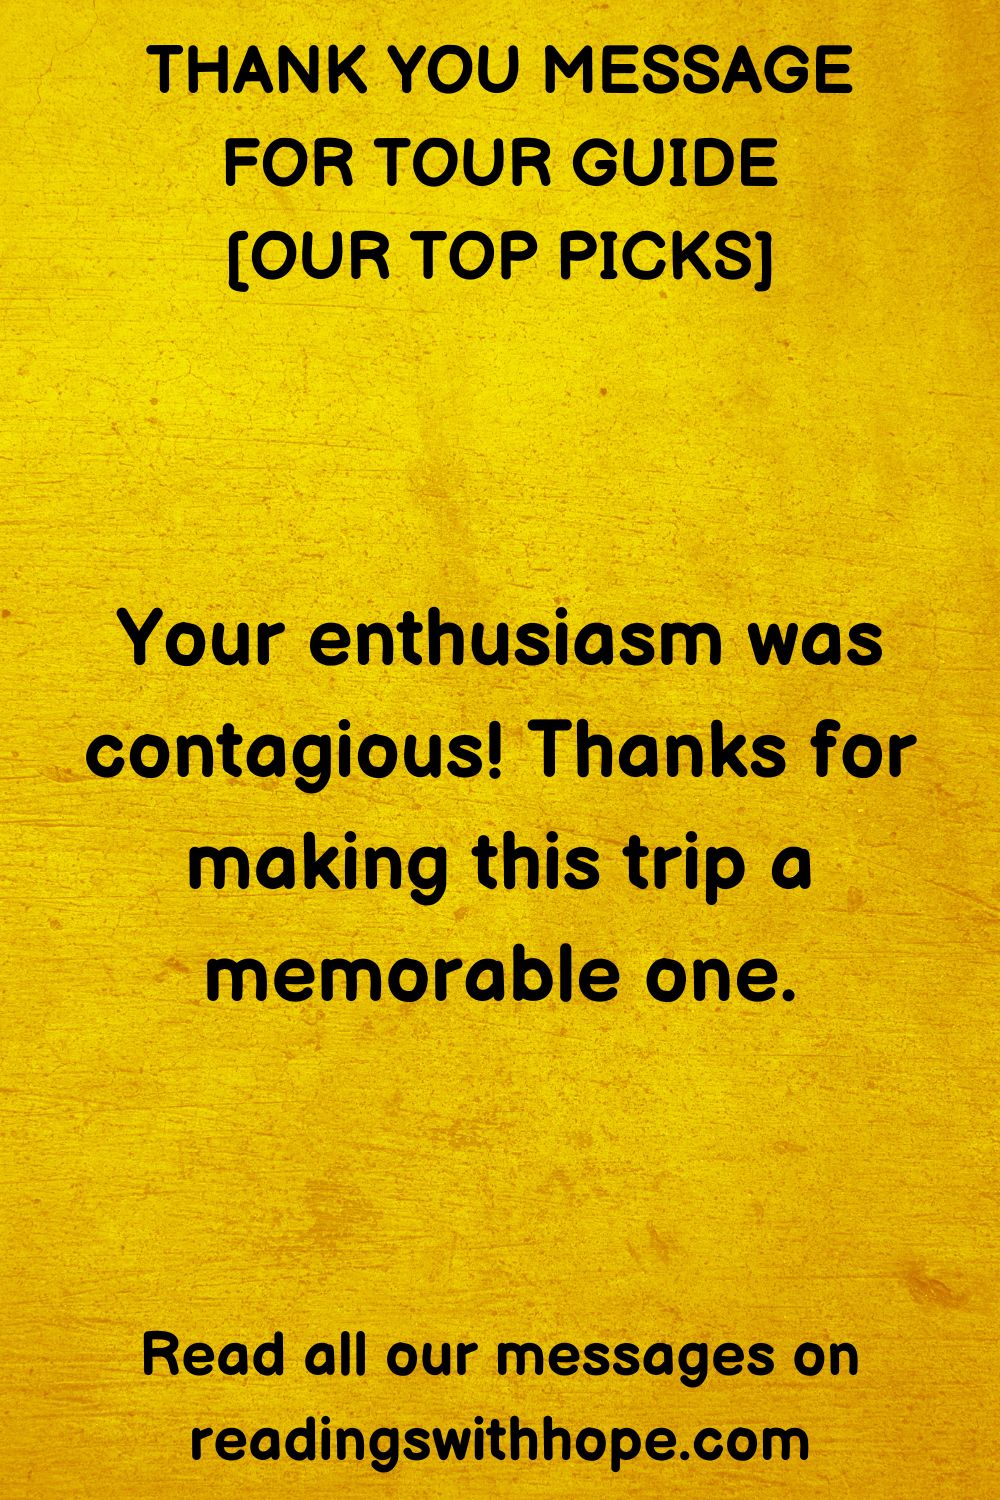 Thank You Message for Tour Guide 2